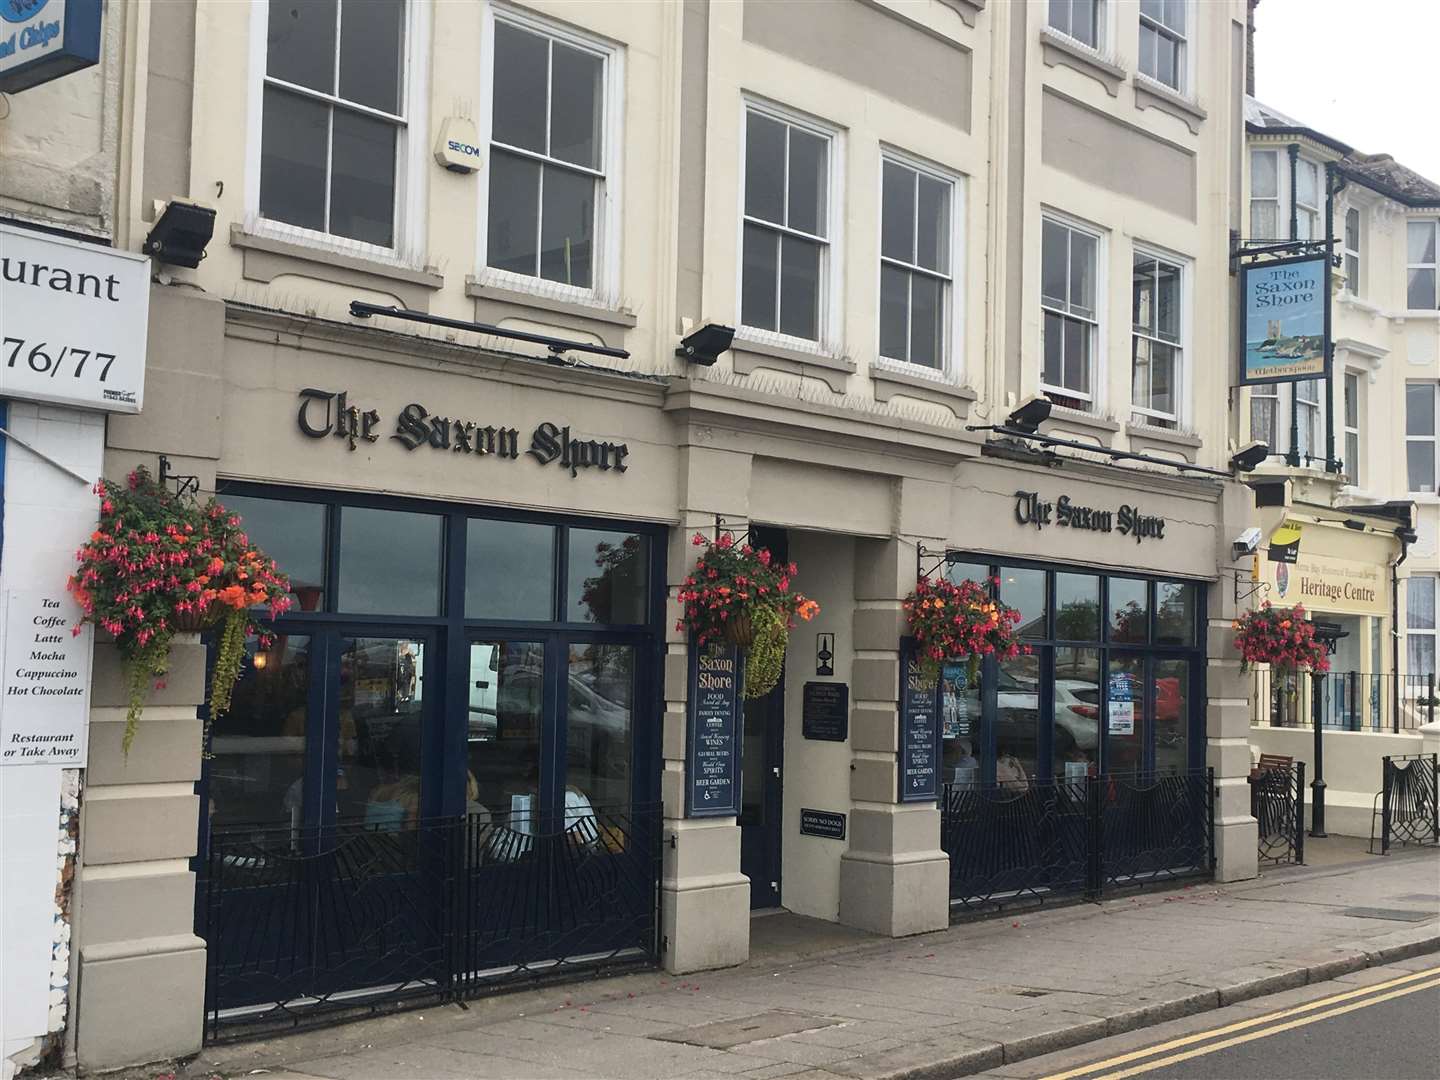 The Saxon Shore Wetherspoon's pub in Herne Bay